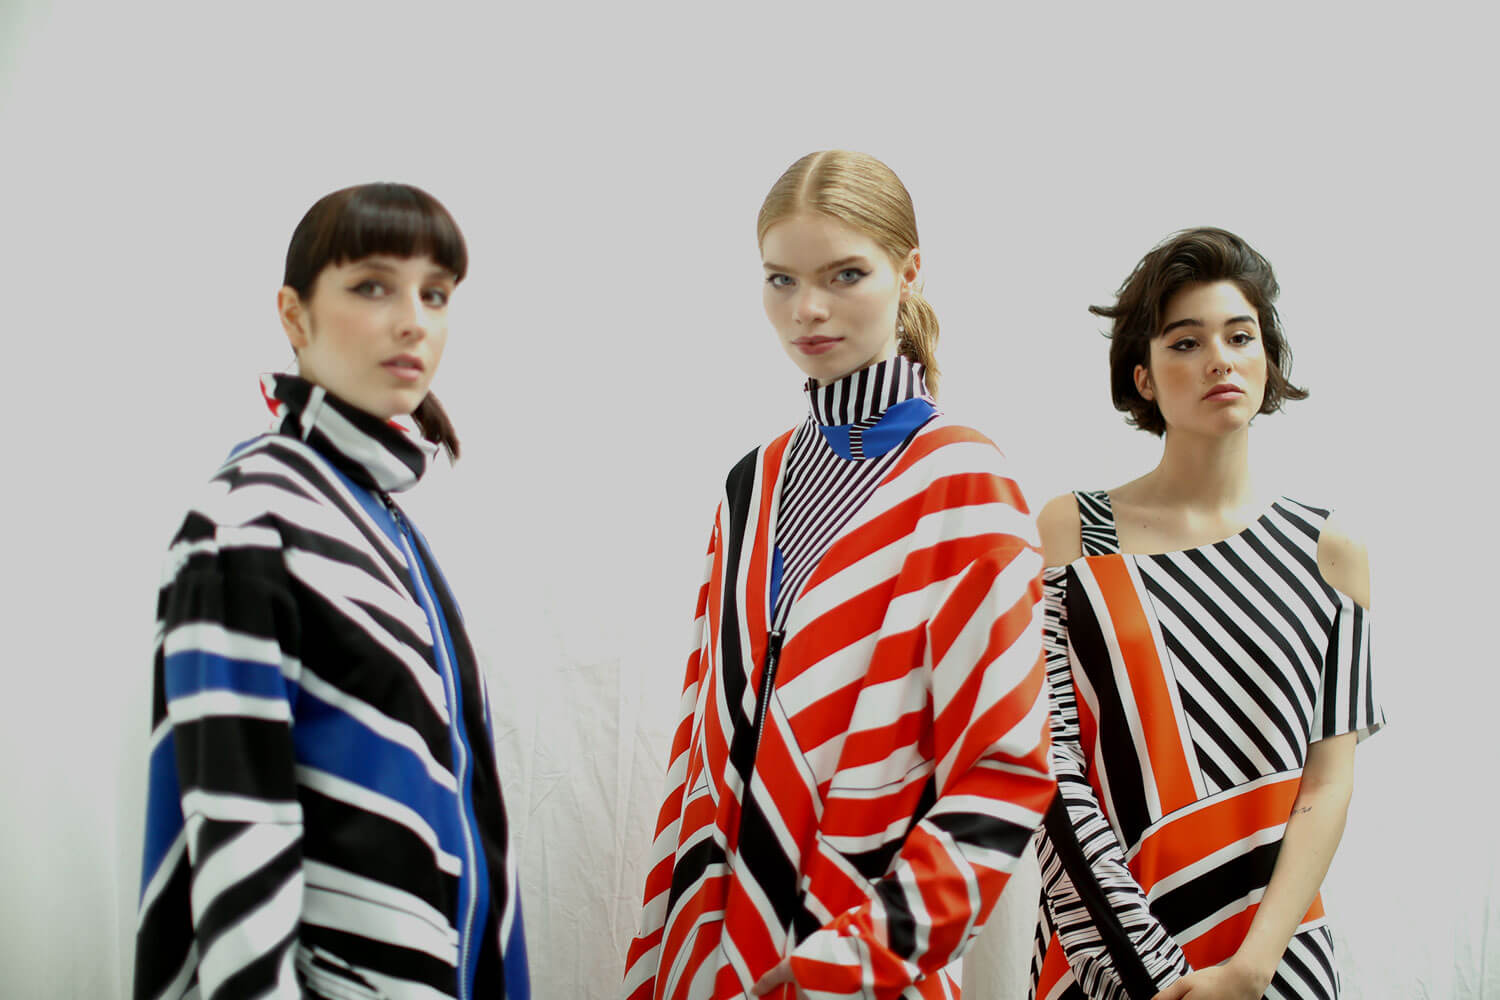 Three models wearing geometric patterned clothing